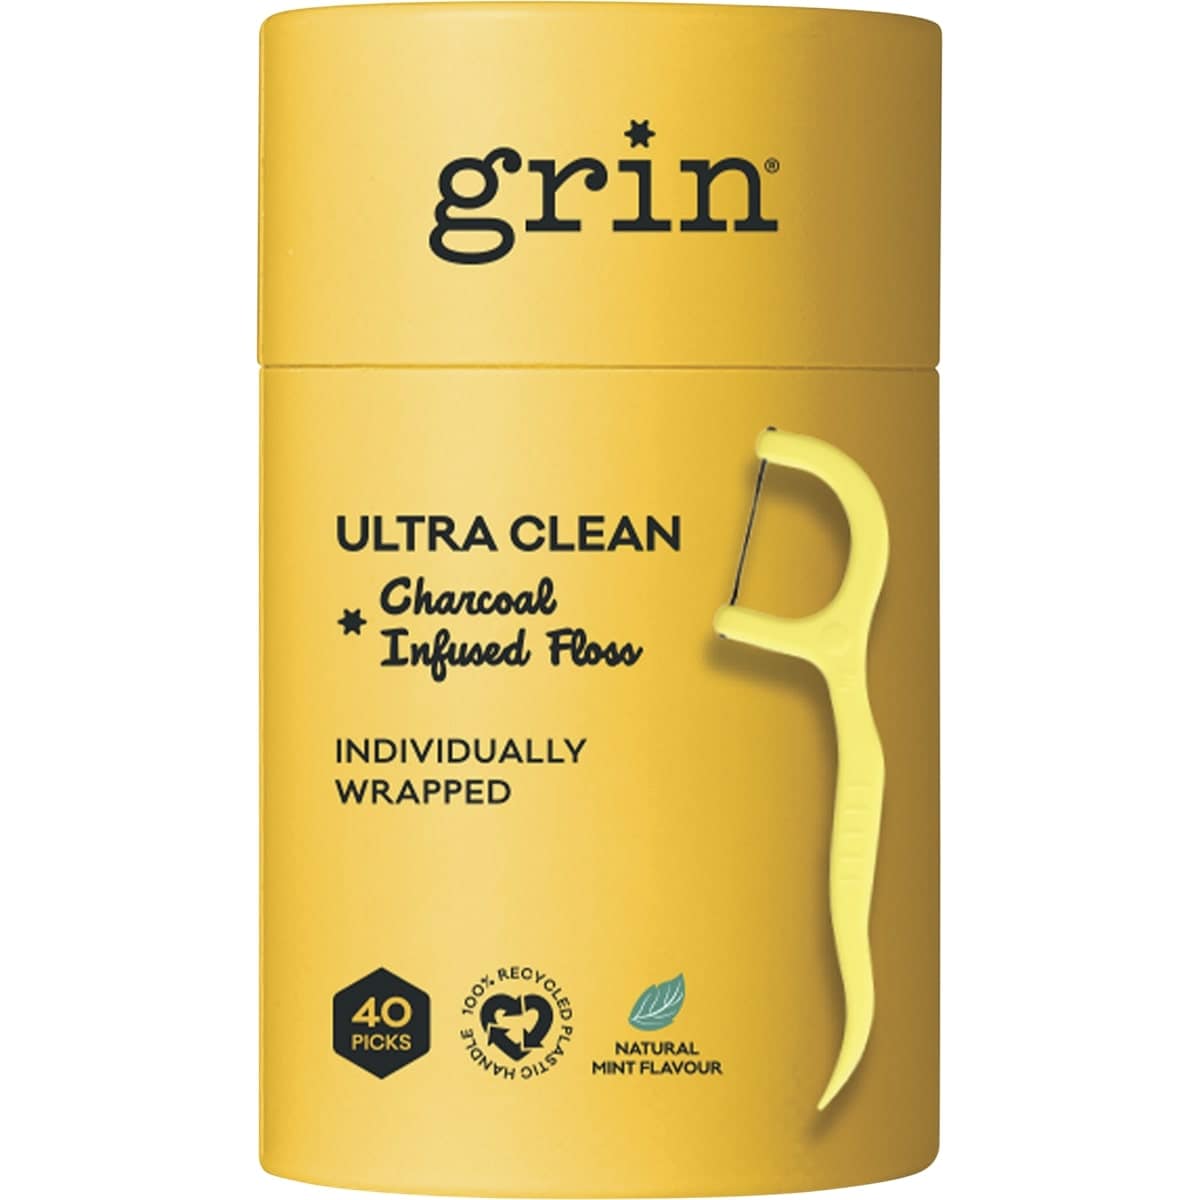 GRIN Charcoal Infused Dental Floss Pick Ultra Clean 40 Pack